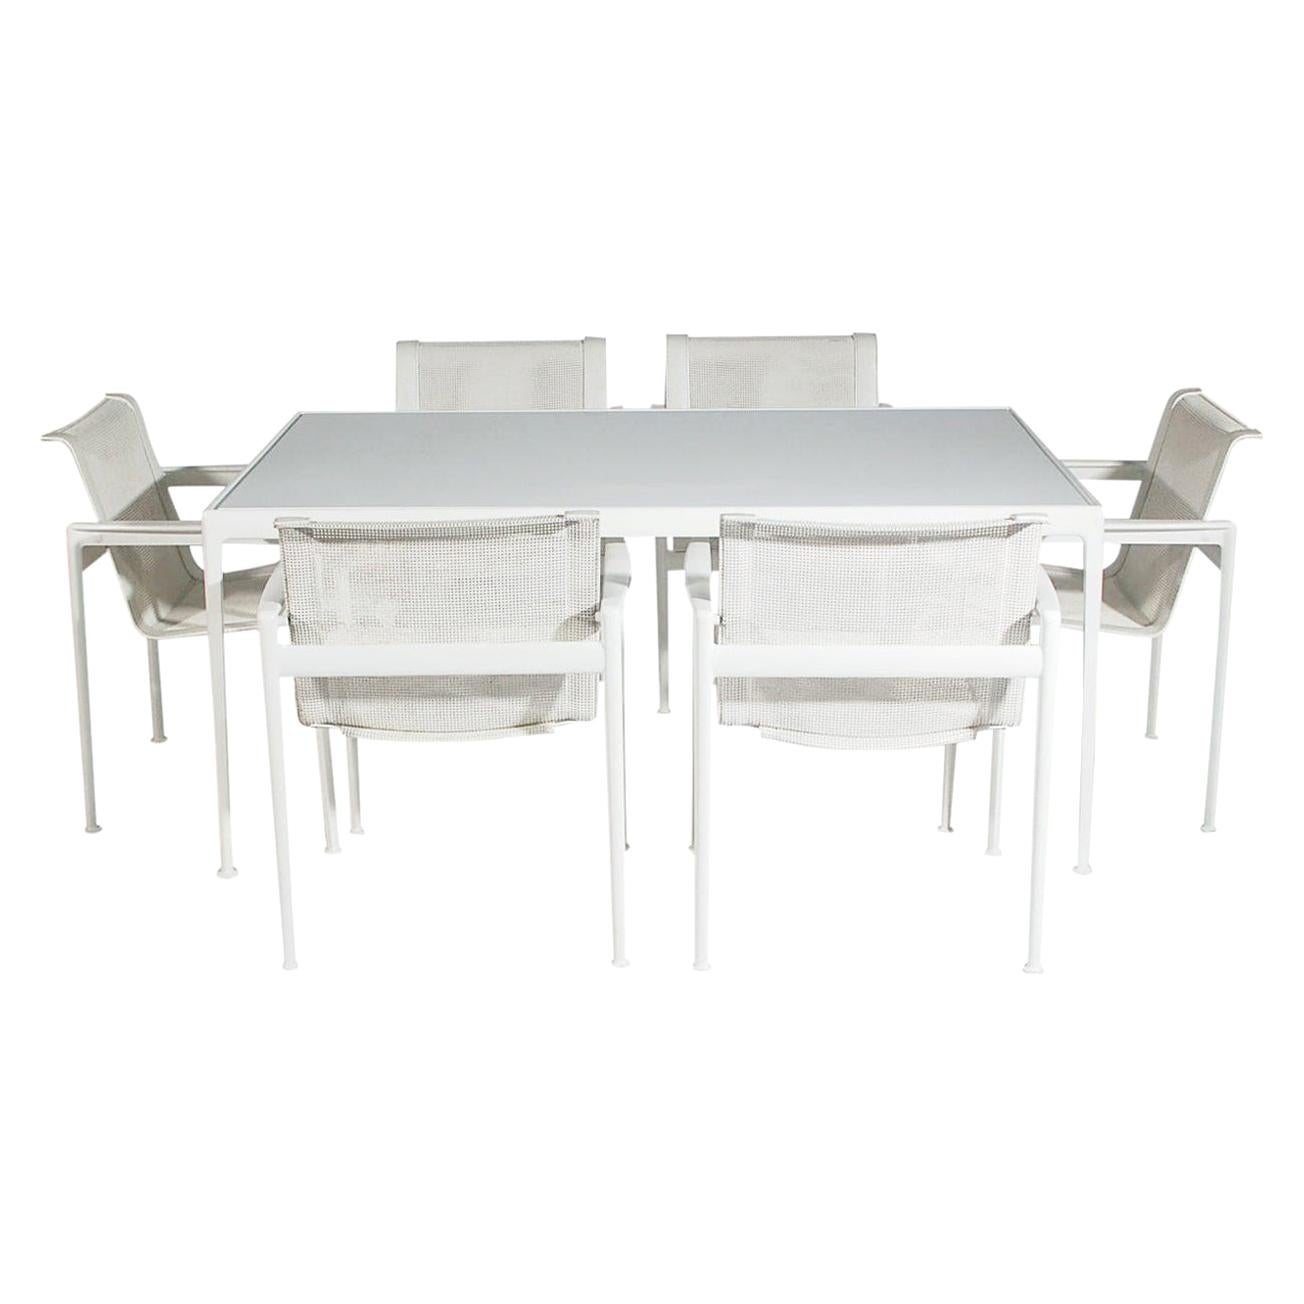 Mid-Century Modern White Patio Chairs and Table Set by Richard Schultz for Knoll